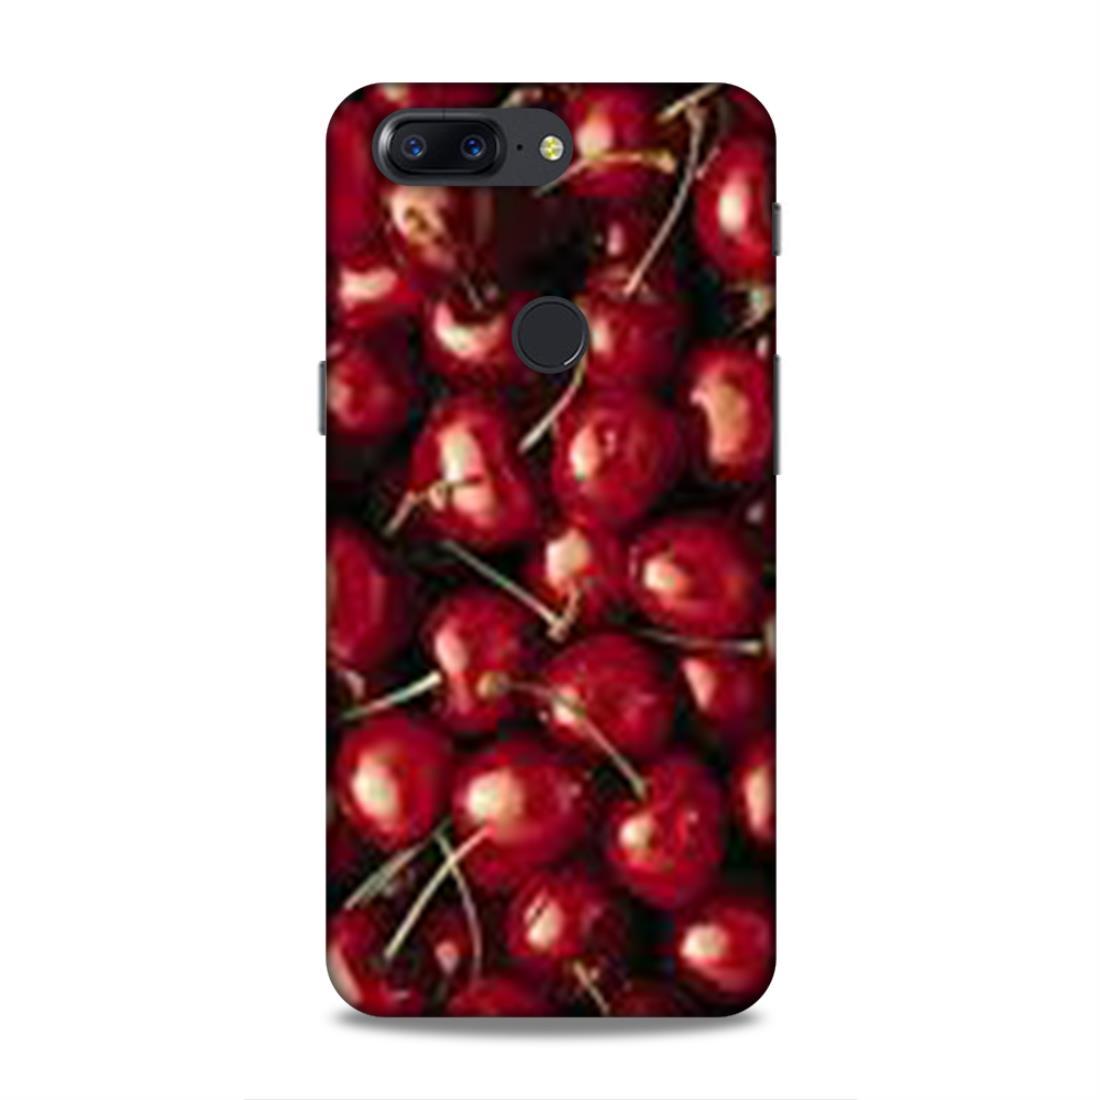 Red Cherry Love OnePlus 5T Mobile Cover Case